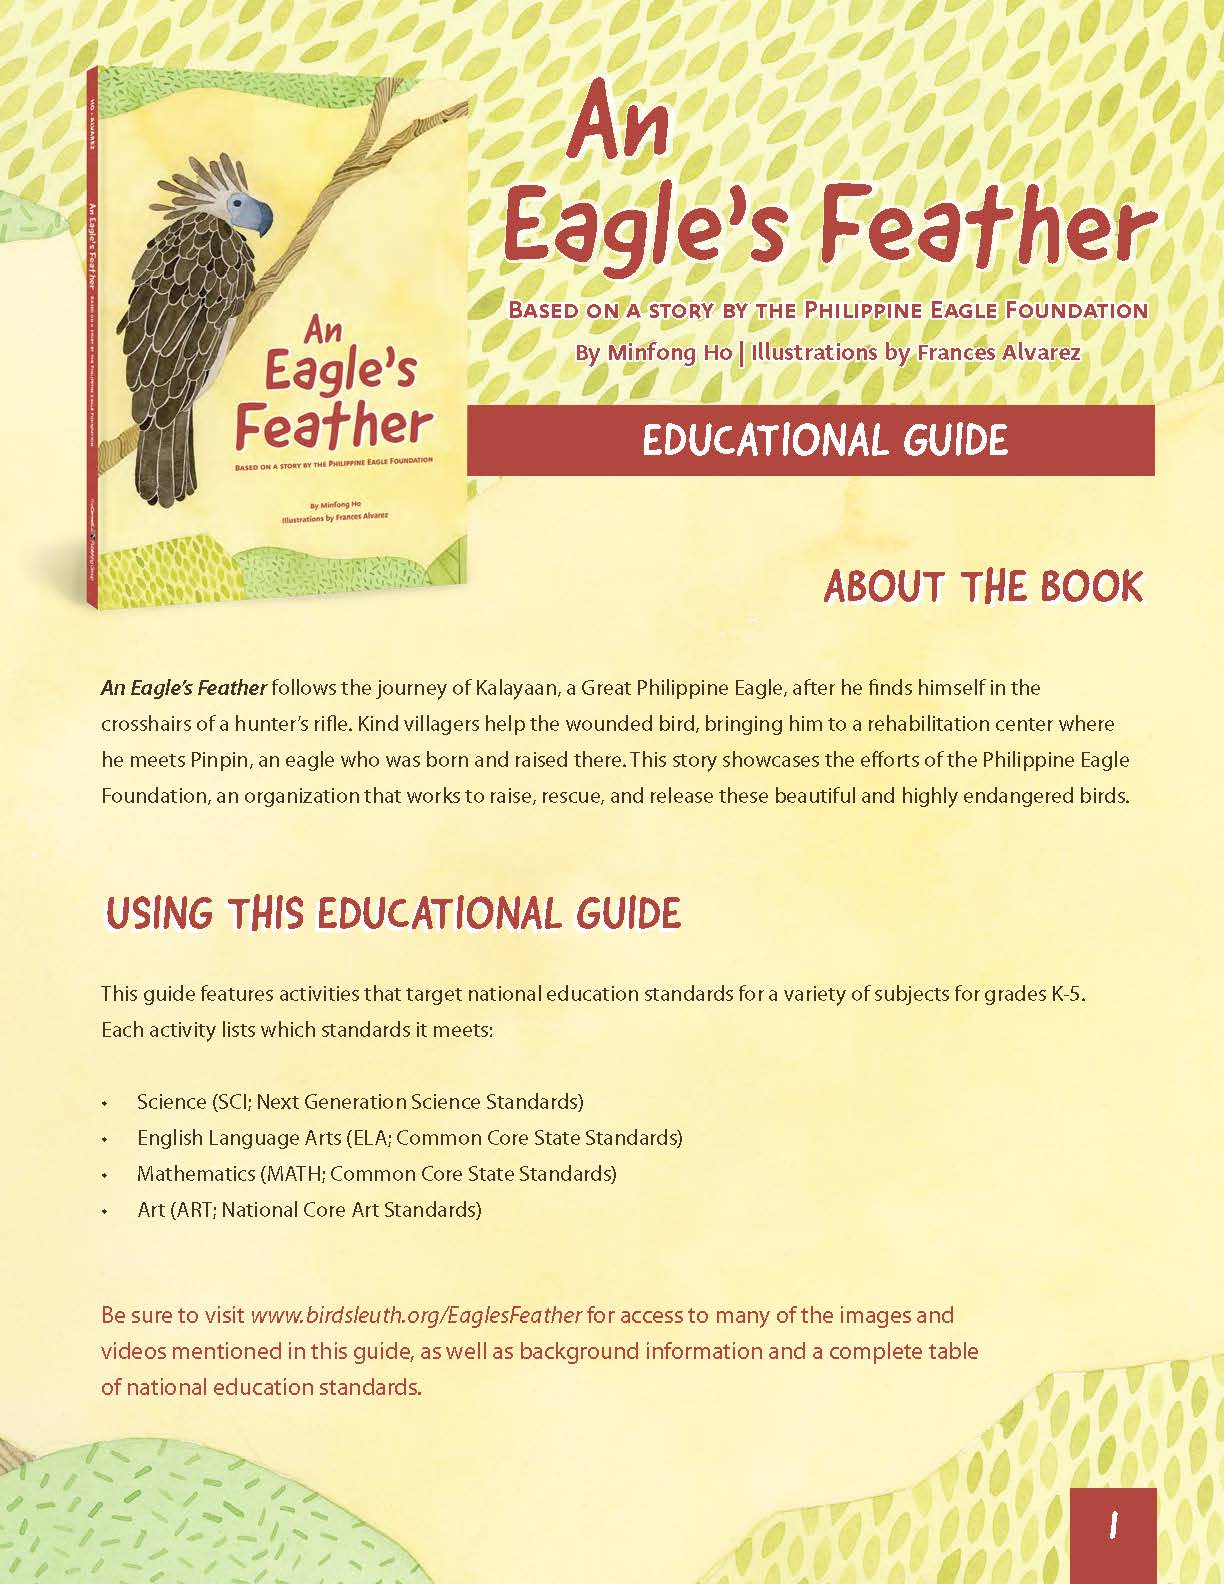 An Eagle's Feather overview which can be accessed via the guide overview and supplemental materials link next to this image.